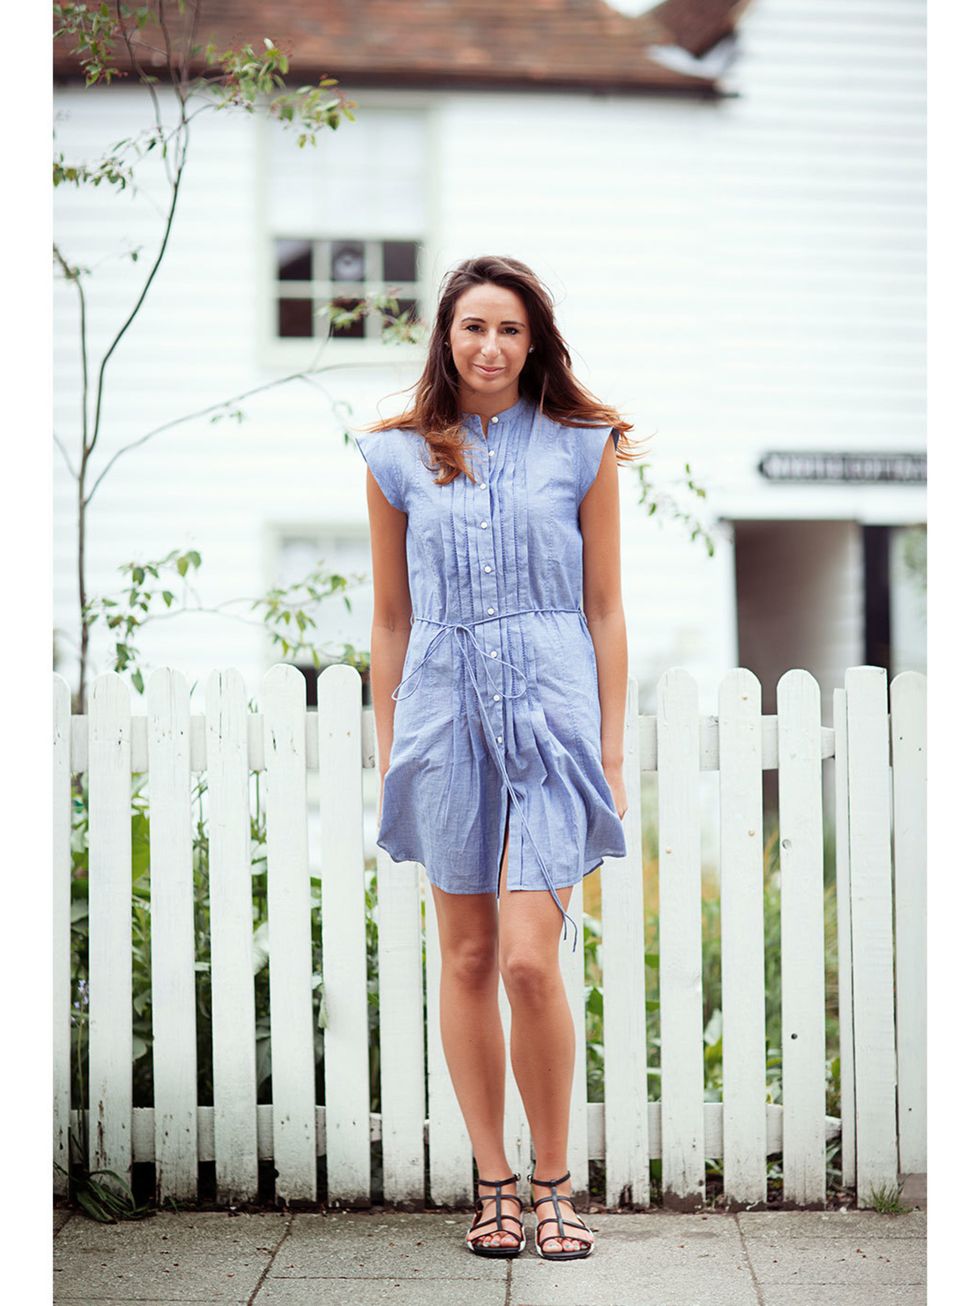 Caroline Robinson wears Gap dress and &Other Stories sandals.